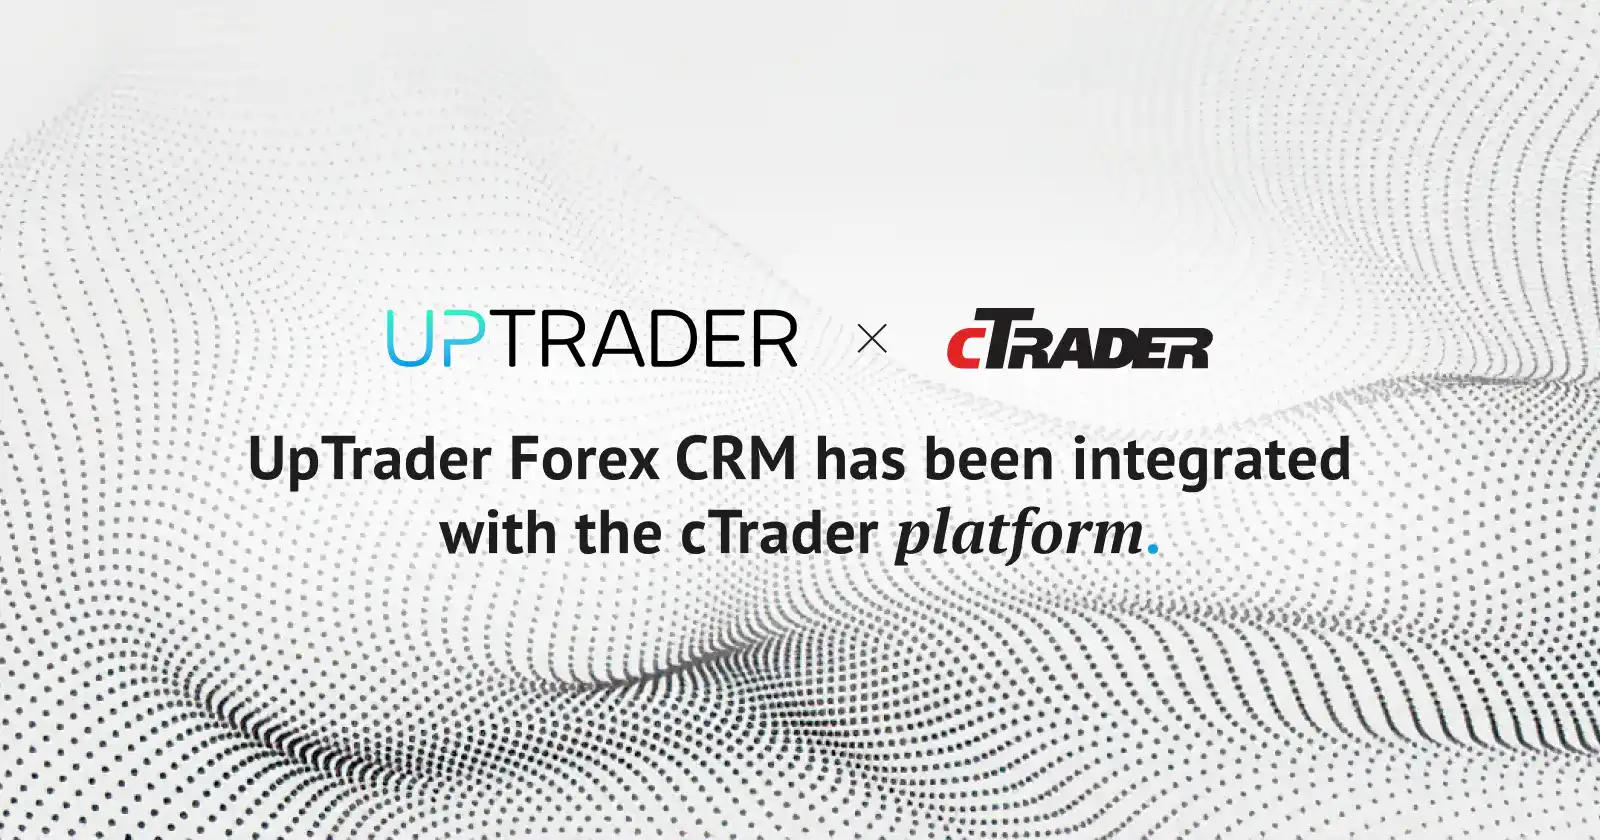 UpTrader Forex CRM has been integrated with the cTrader platform